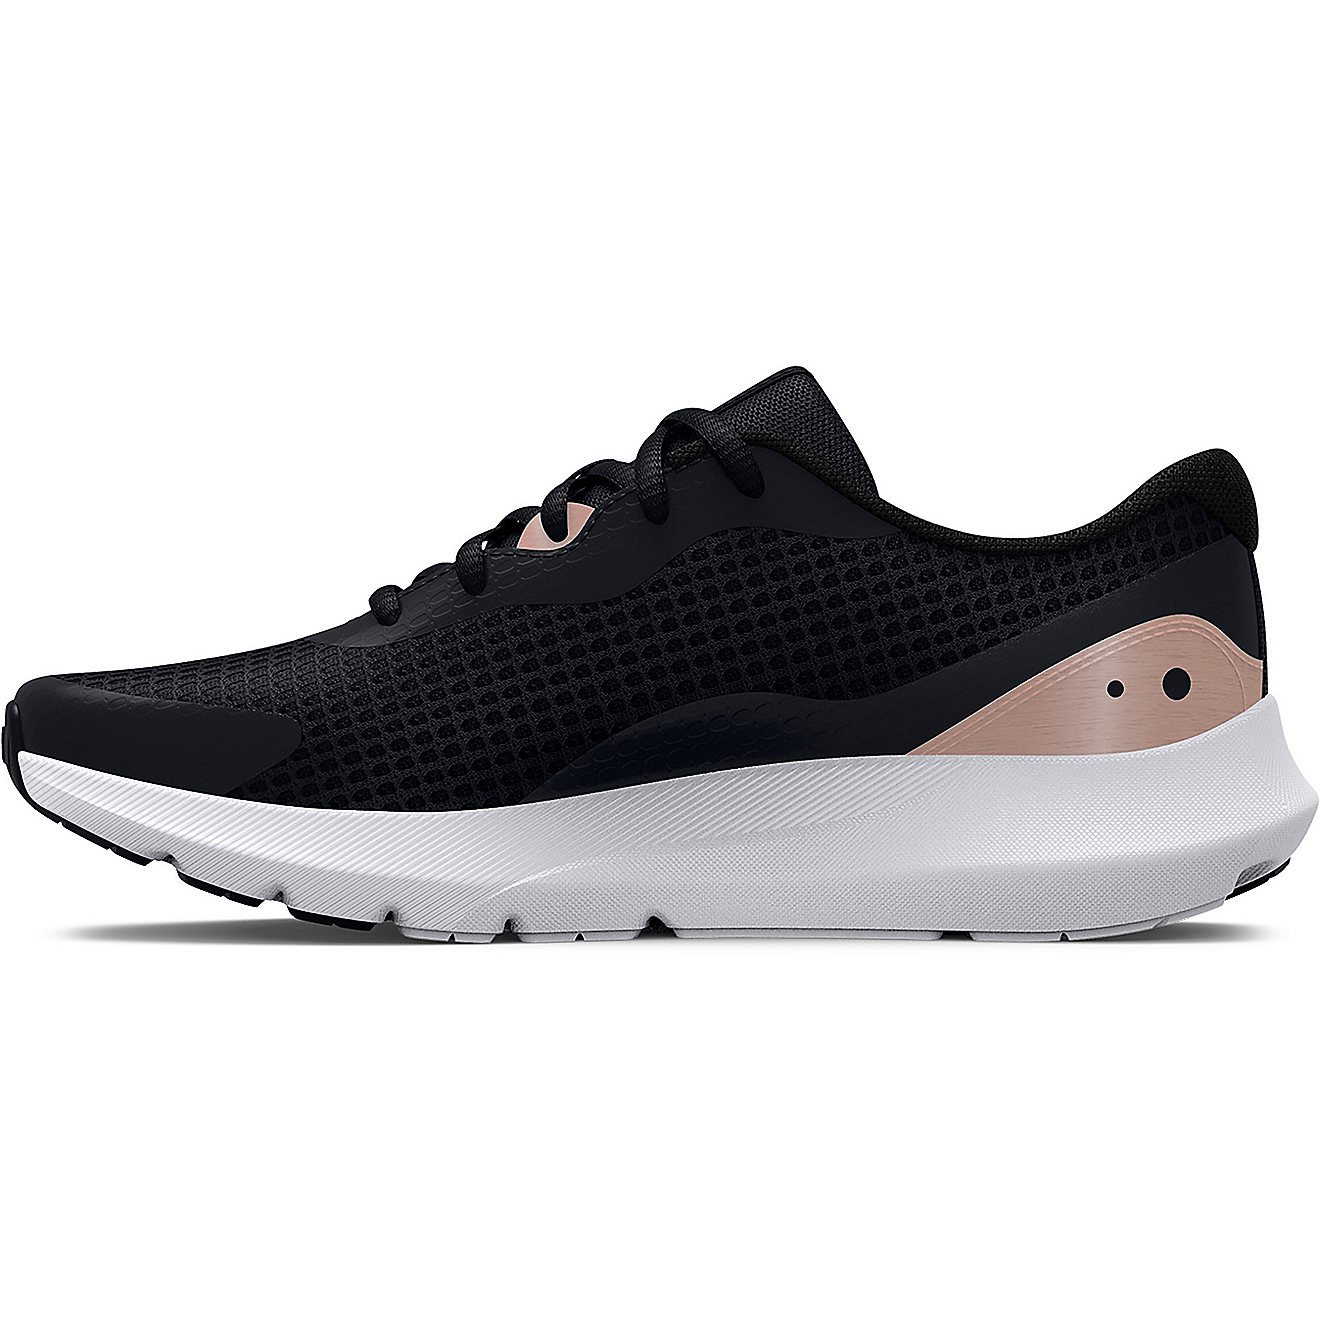 Under Armour Women’s Surge 3 Running Shoes | Academy